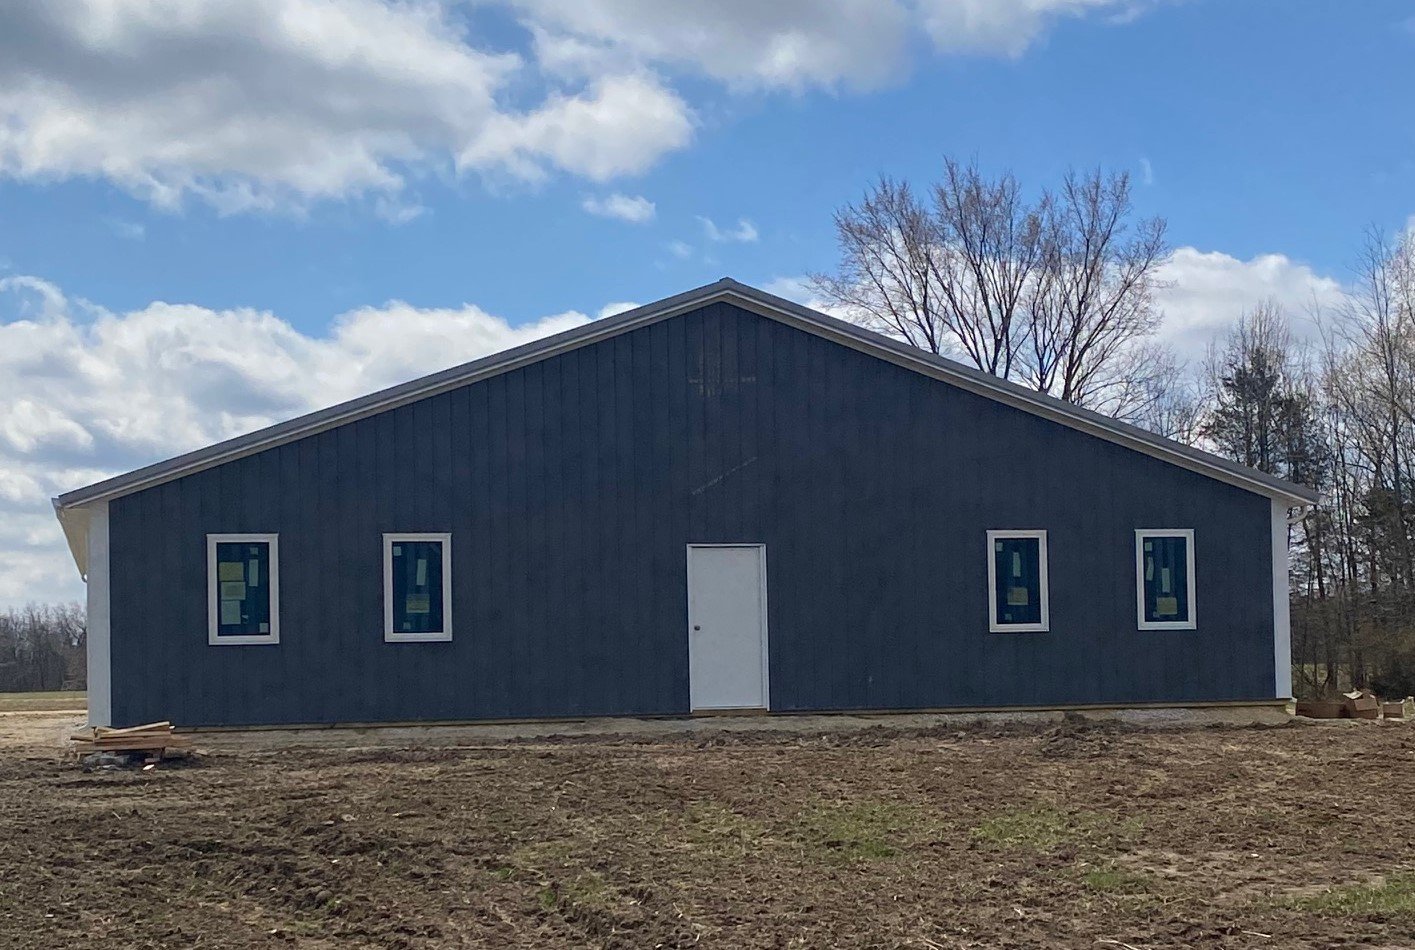 SHELTER PROGRESS — Construction is progressing at the future Wags & Whiskers animal shelter in Innsbrook. The concrete floor of the shelter is poured and the exterior structure is now complete, according to the nonprofit.